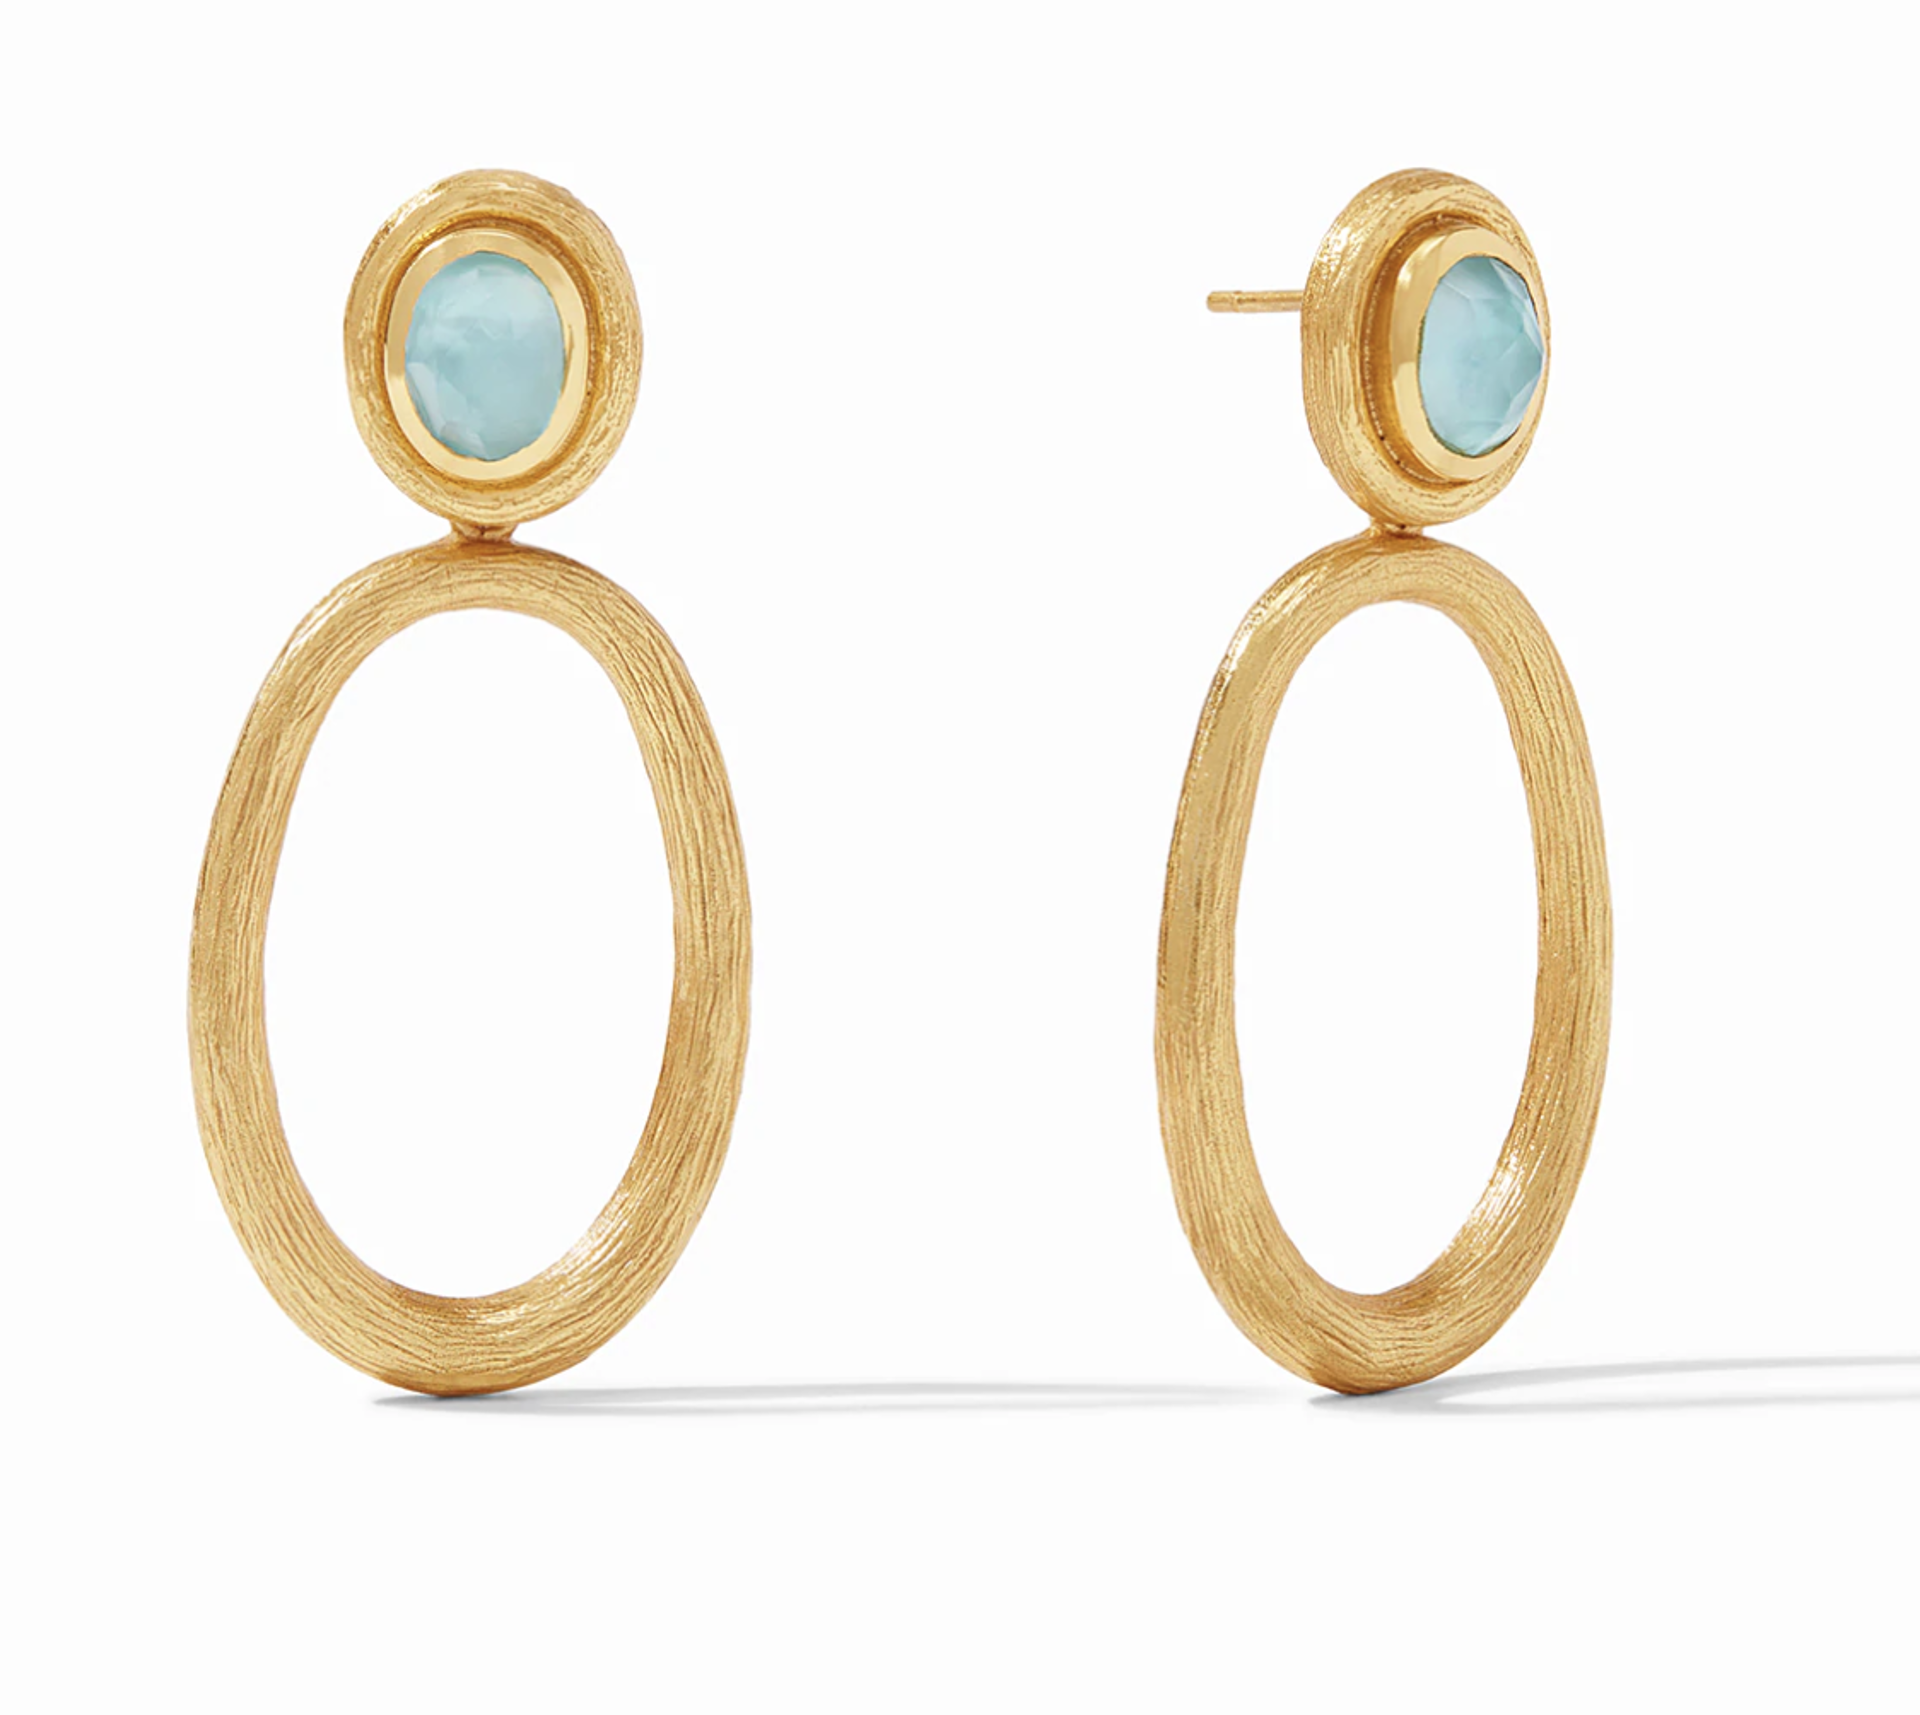 Simone Statement Earring - Iridescent Bahamian Blue by Julie Vos